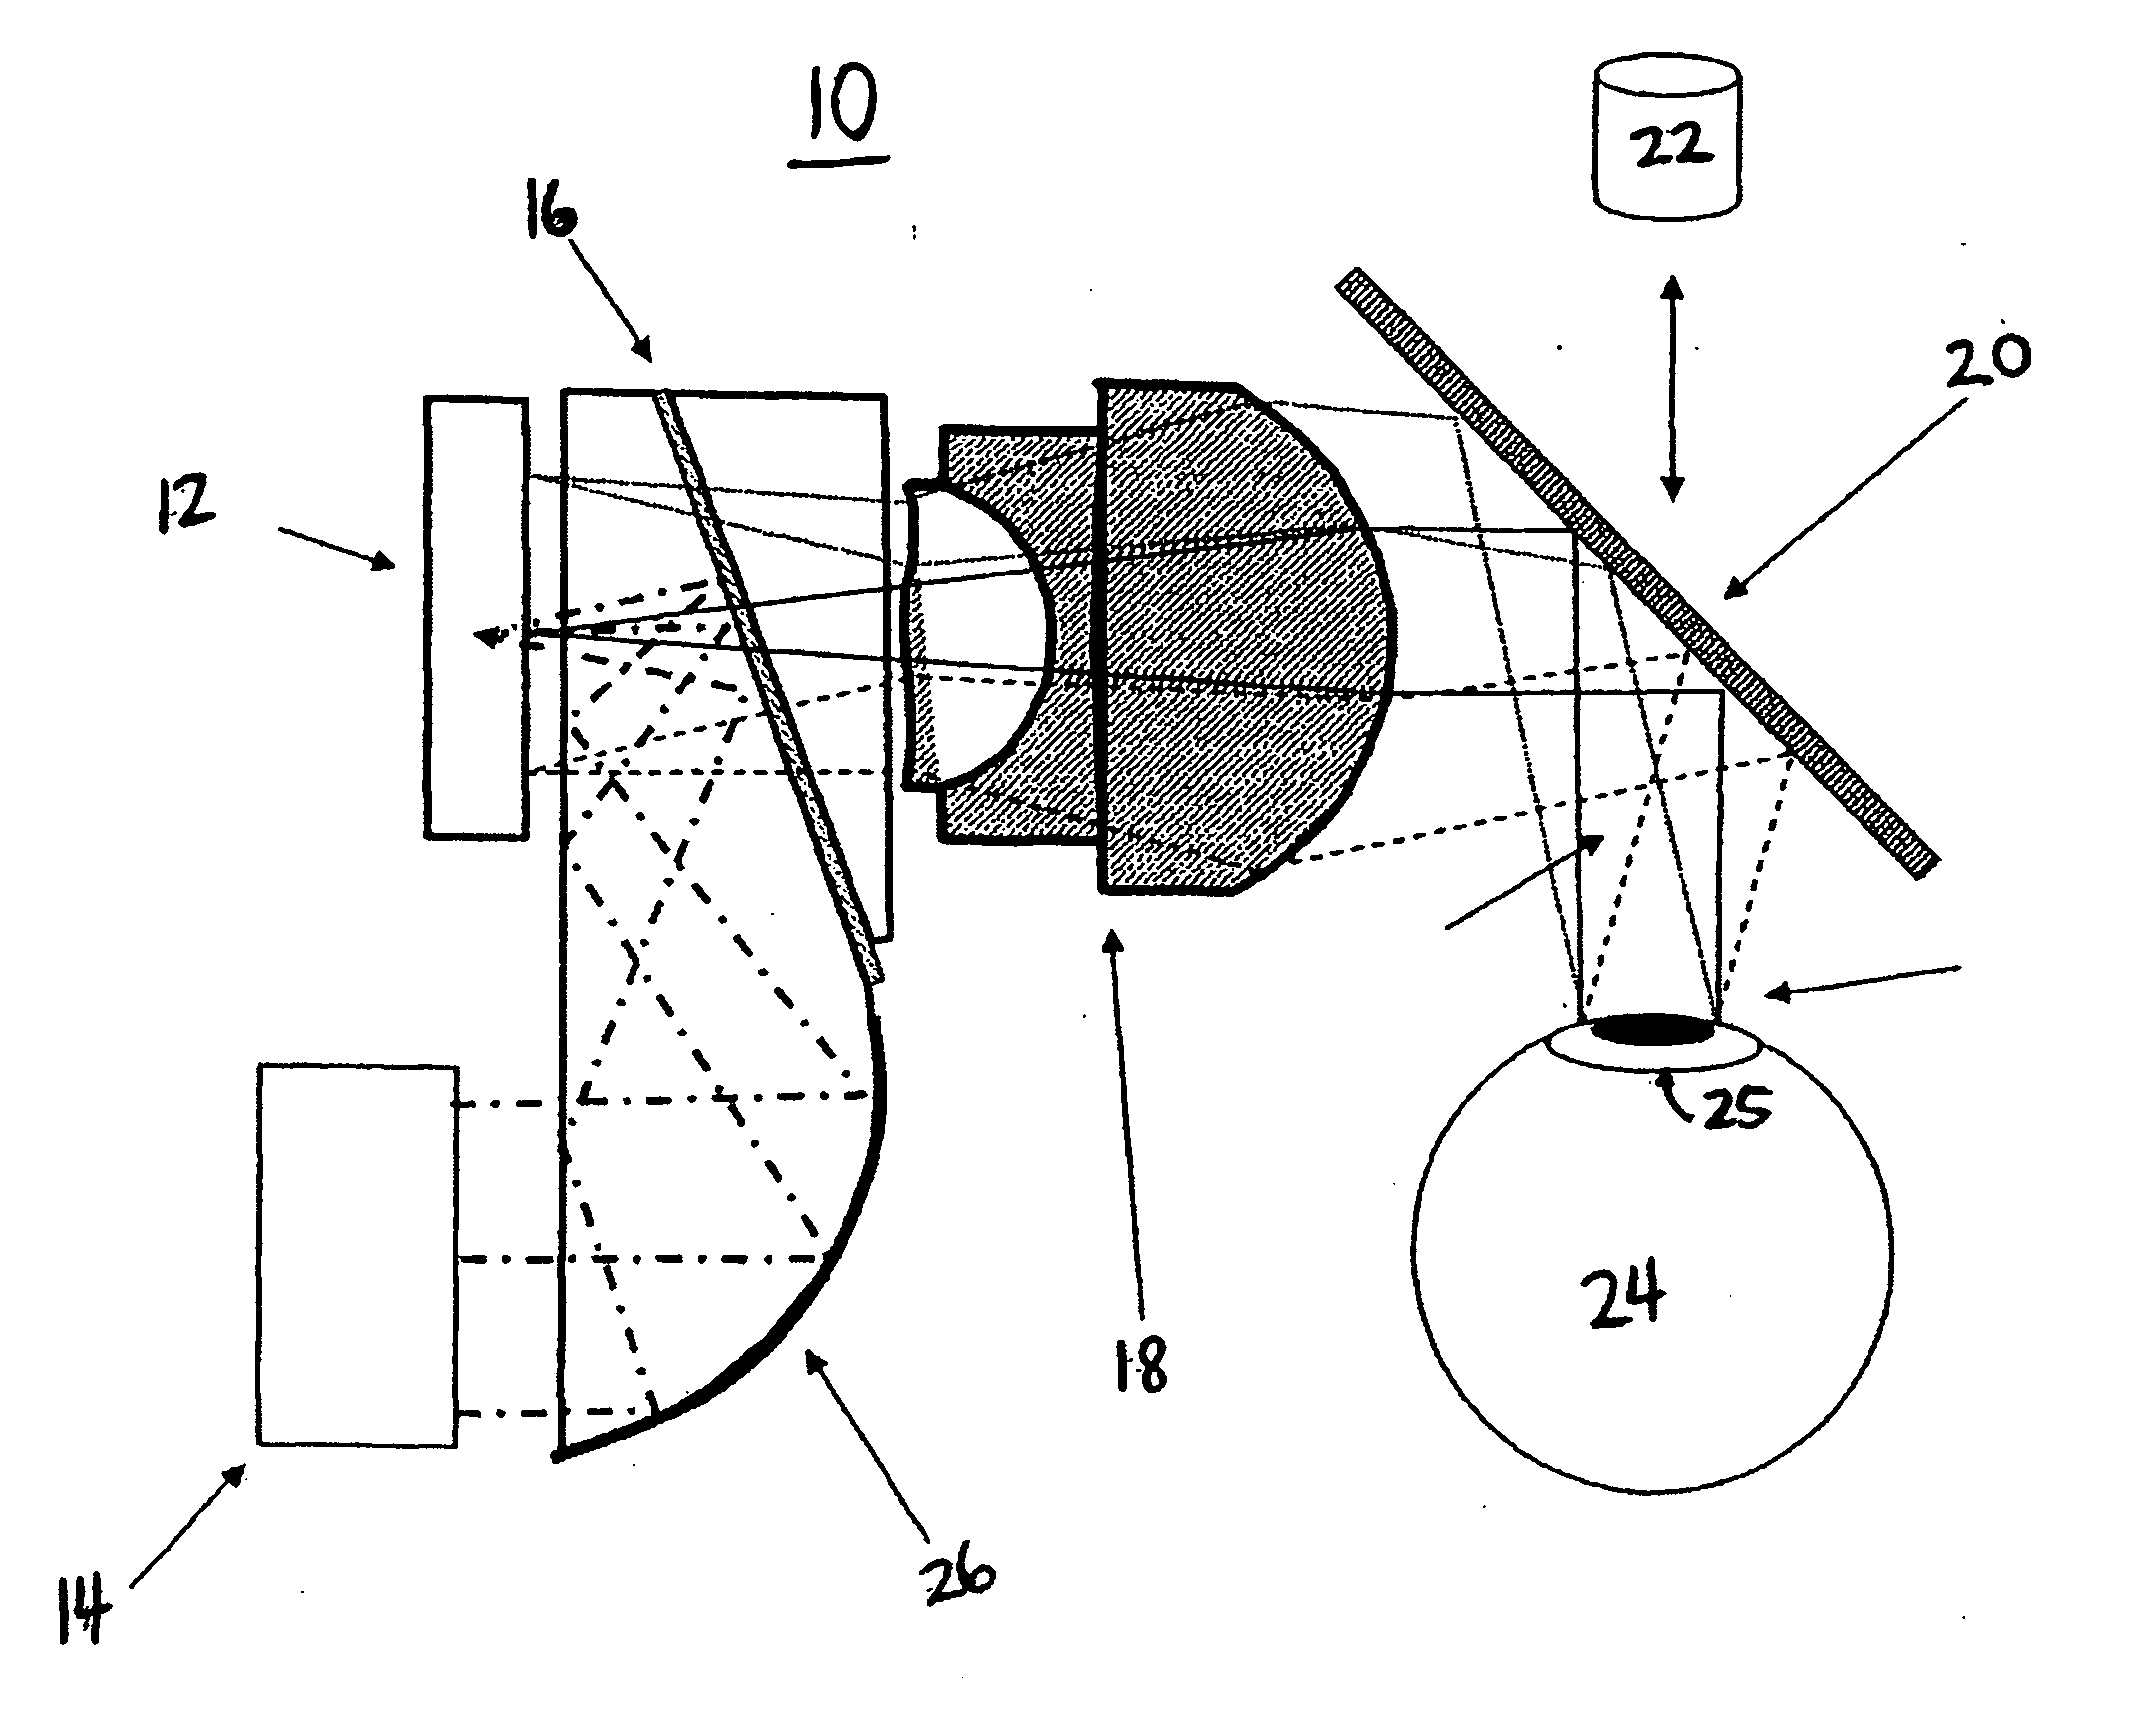 Method of combining images in a wearable display system